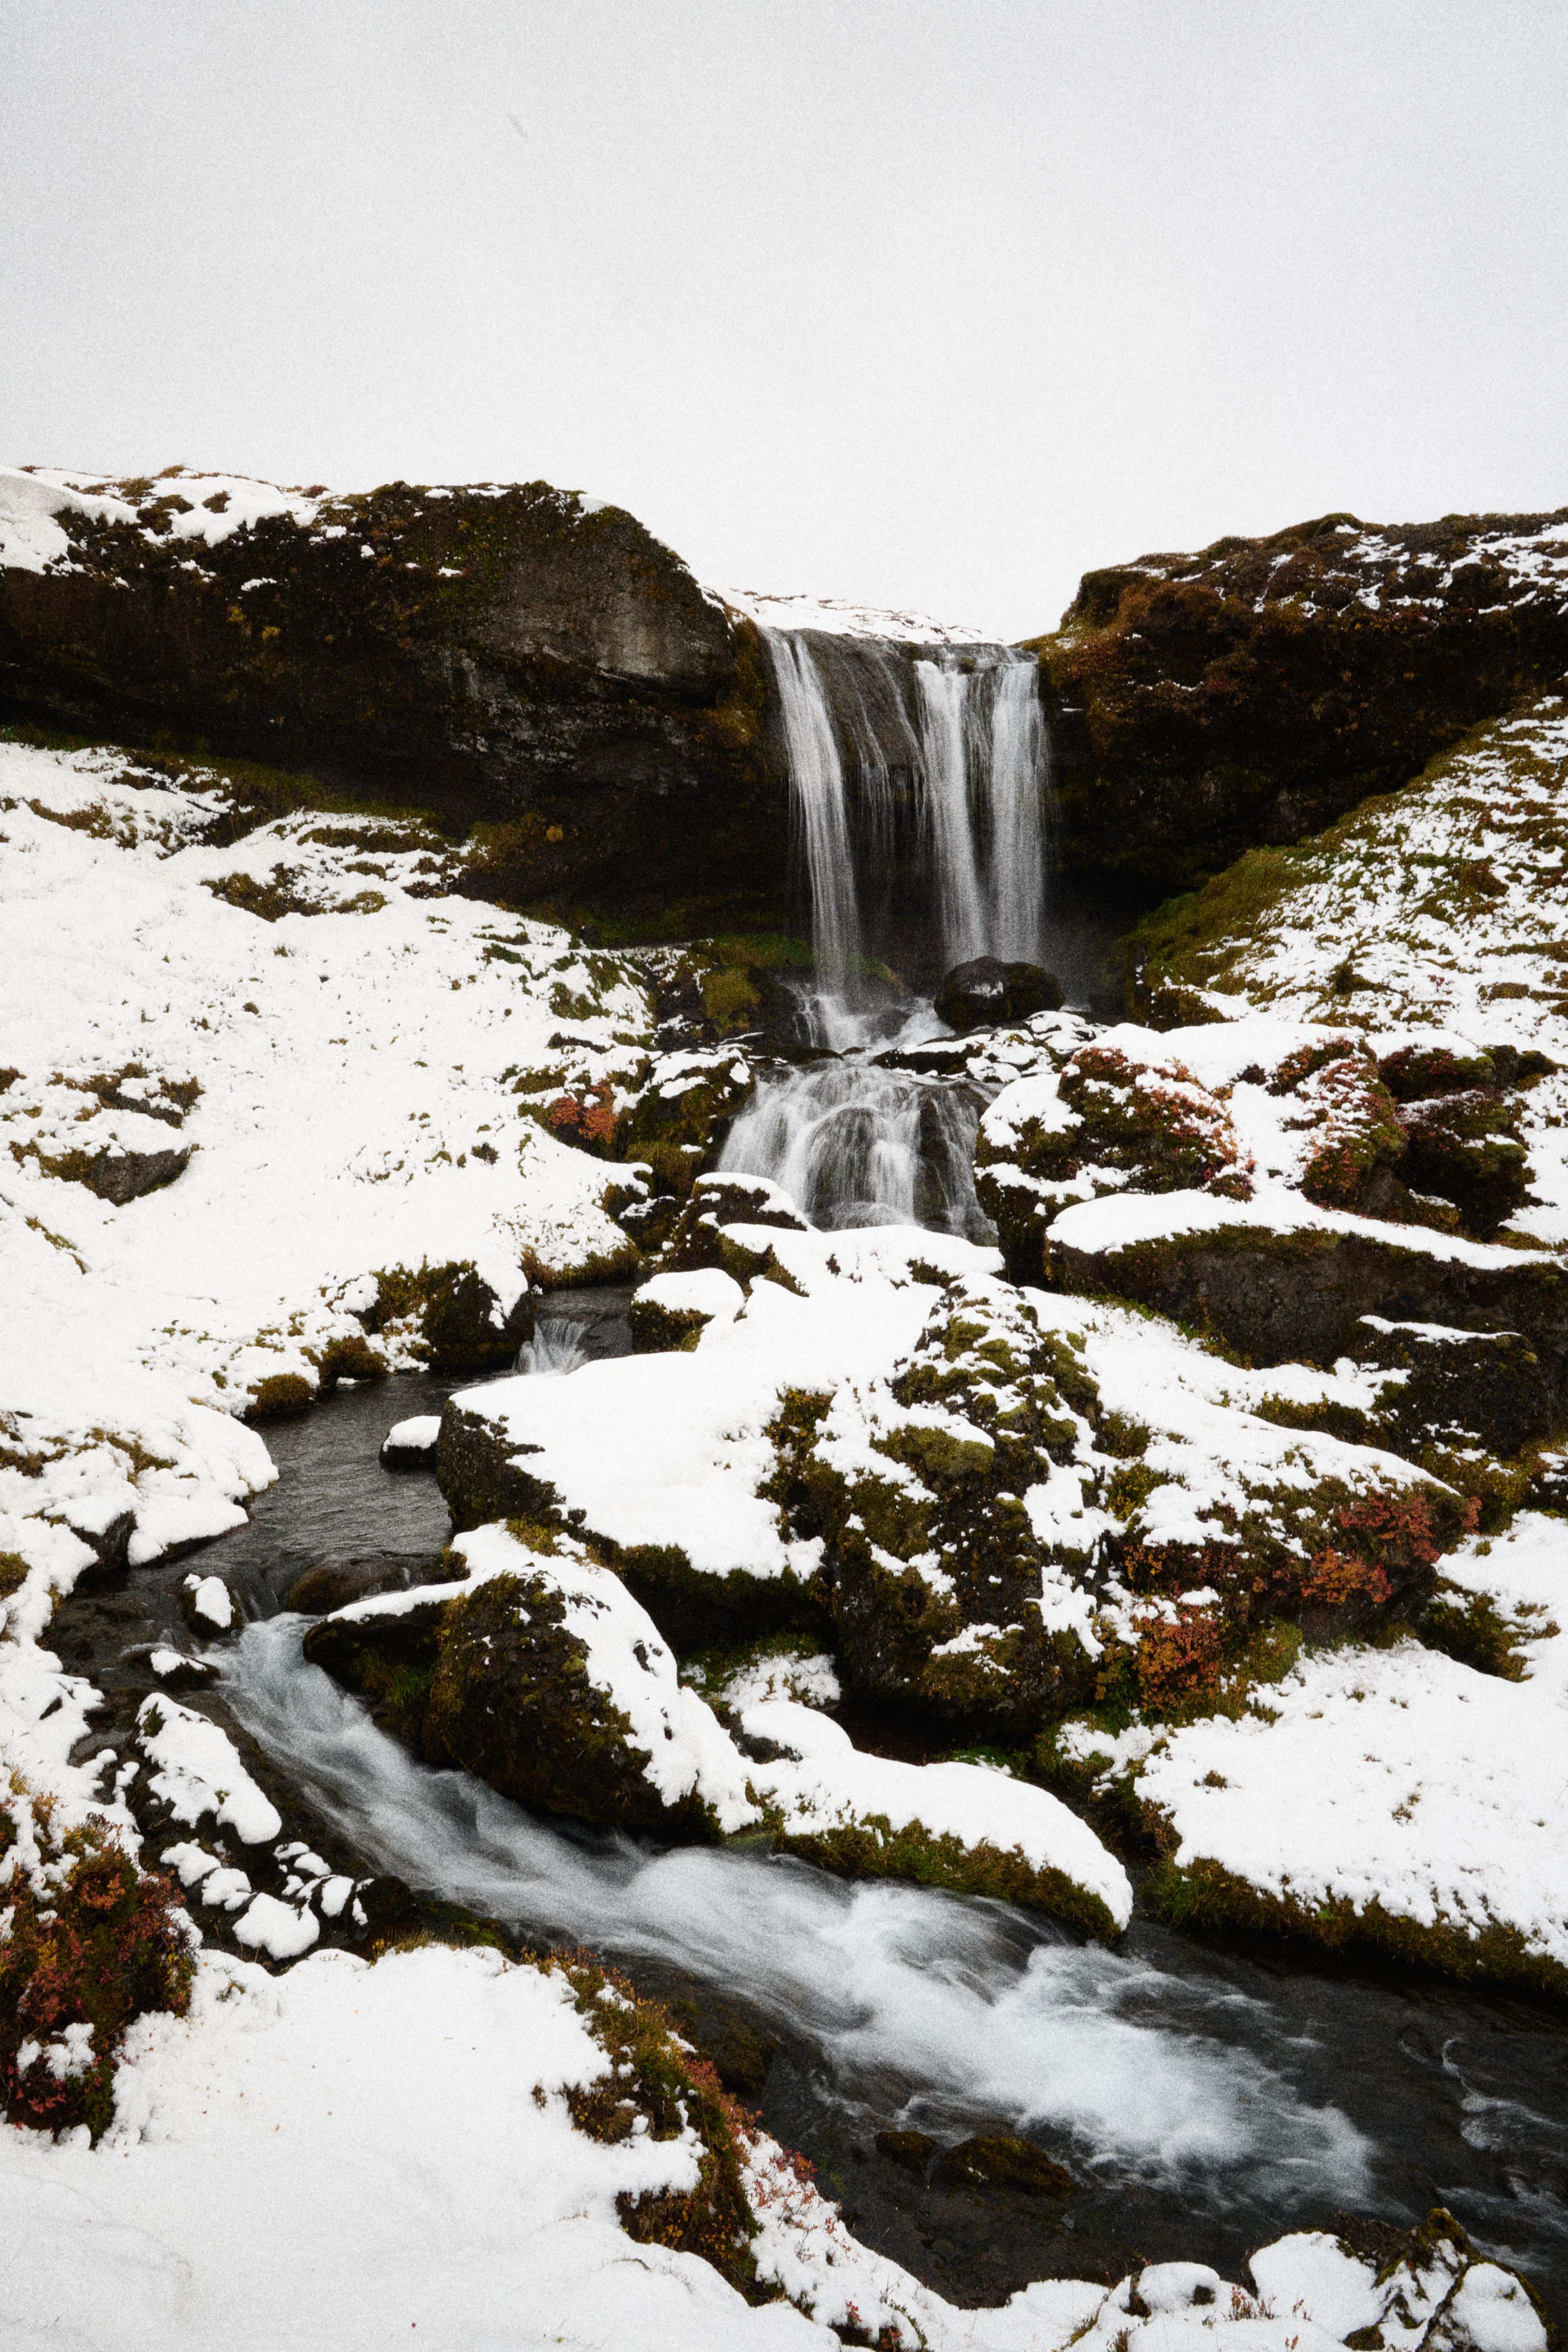 The same waterfall, snowed in and blown about by wind